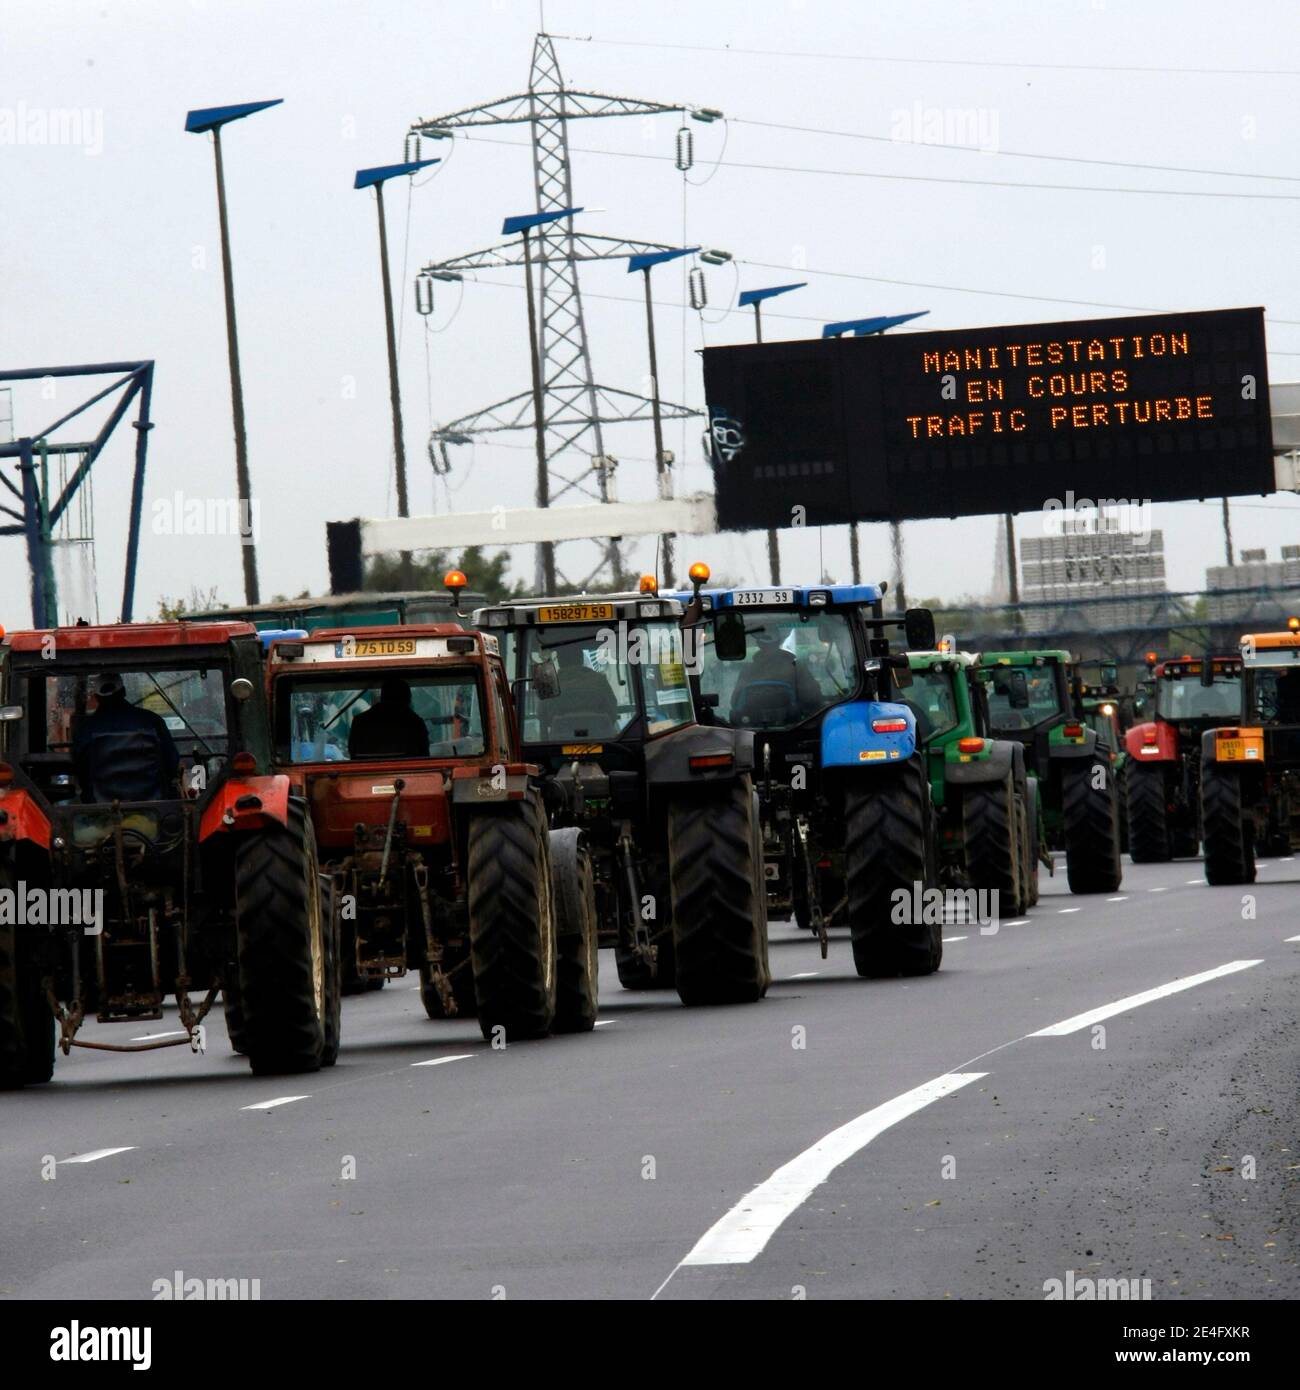 French farmers row with their tractors on October 16, 2009 on the Lille's ring road, northern France, to slow down the traffic in order to protest against their living conditions and the fall in prices of agricultural products. Farmers are holding a natio Stock Photo